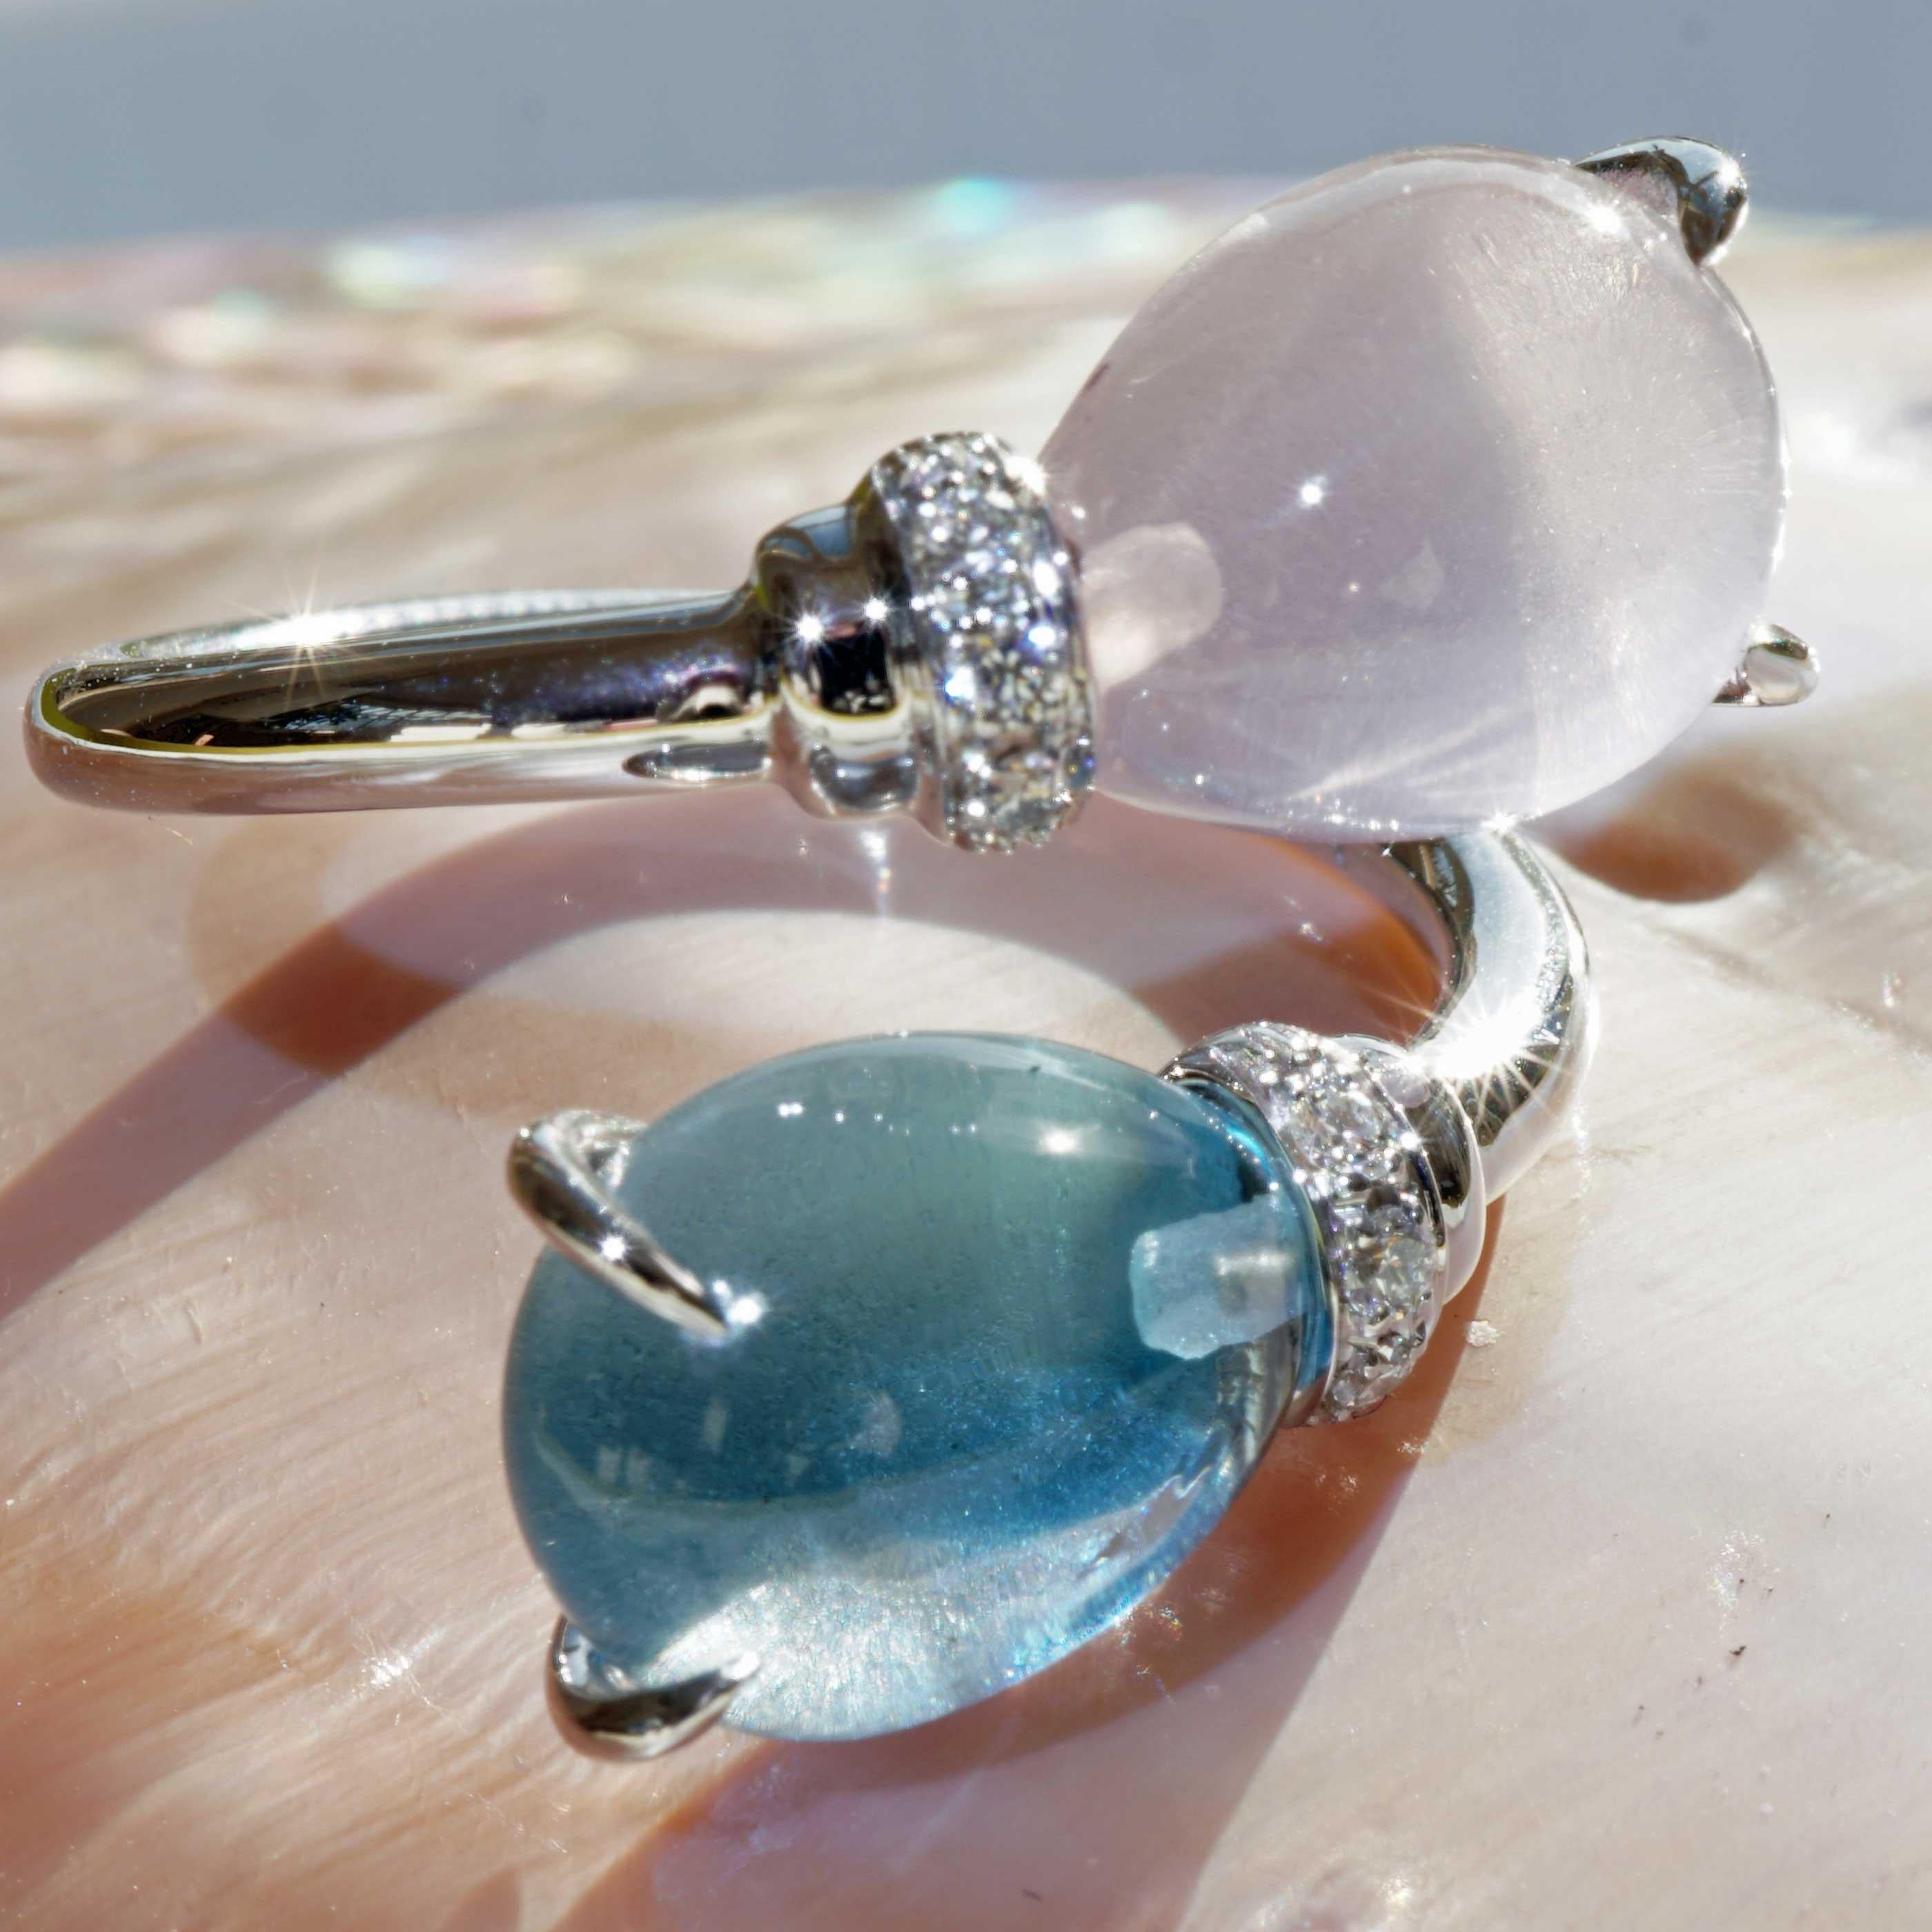 Drop ring made in a traditional Italian goldsmith in Valenza, delightful design, ring with a blue topaz cabochon drop with a smooth surface and a roughened bottom surface (beautiful effect) and a rose quartz cabochon drop set as if it were floating,